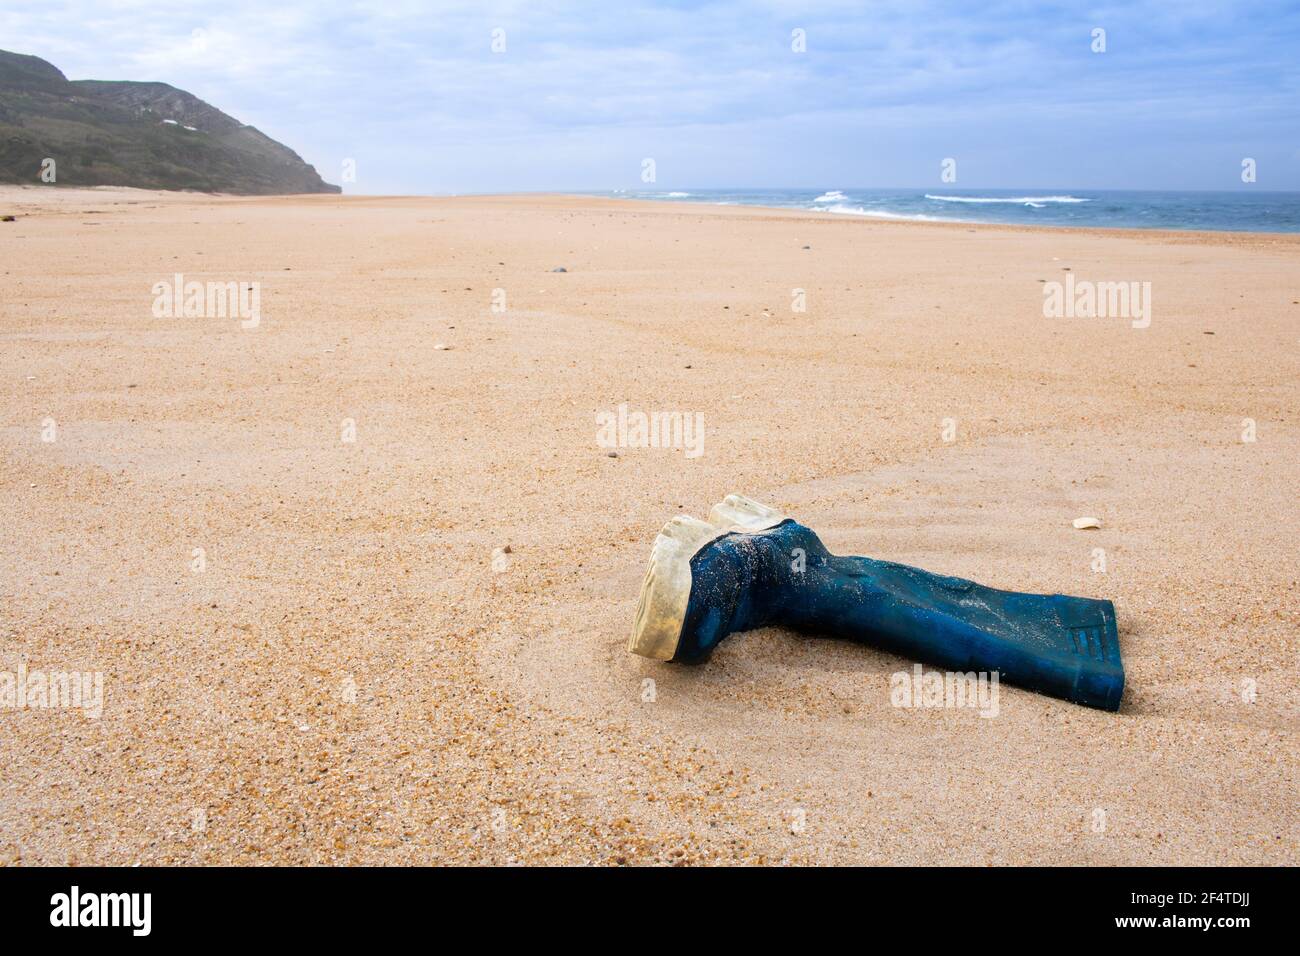 Fisherman's blue rubber boot left on the sand at empty beach with ocean and mountain in the background Stock Photo